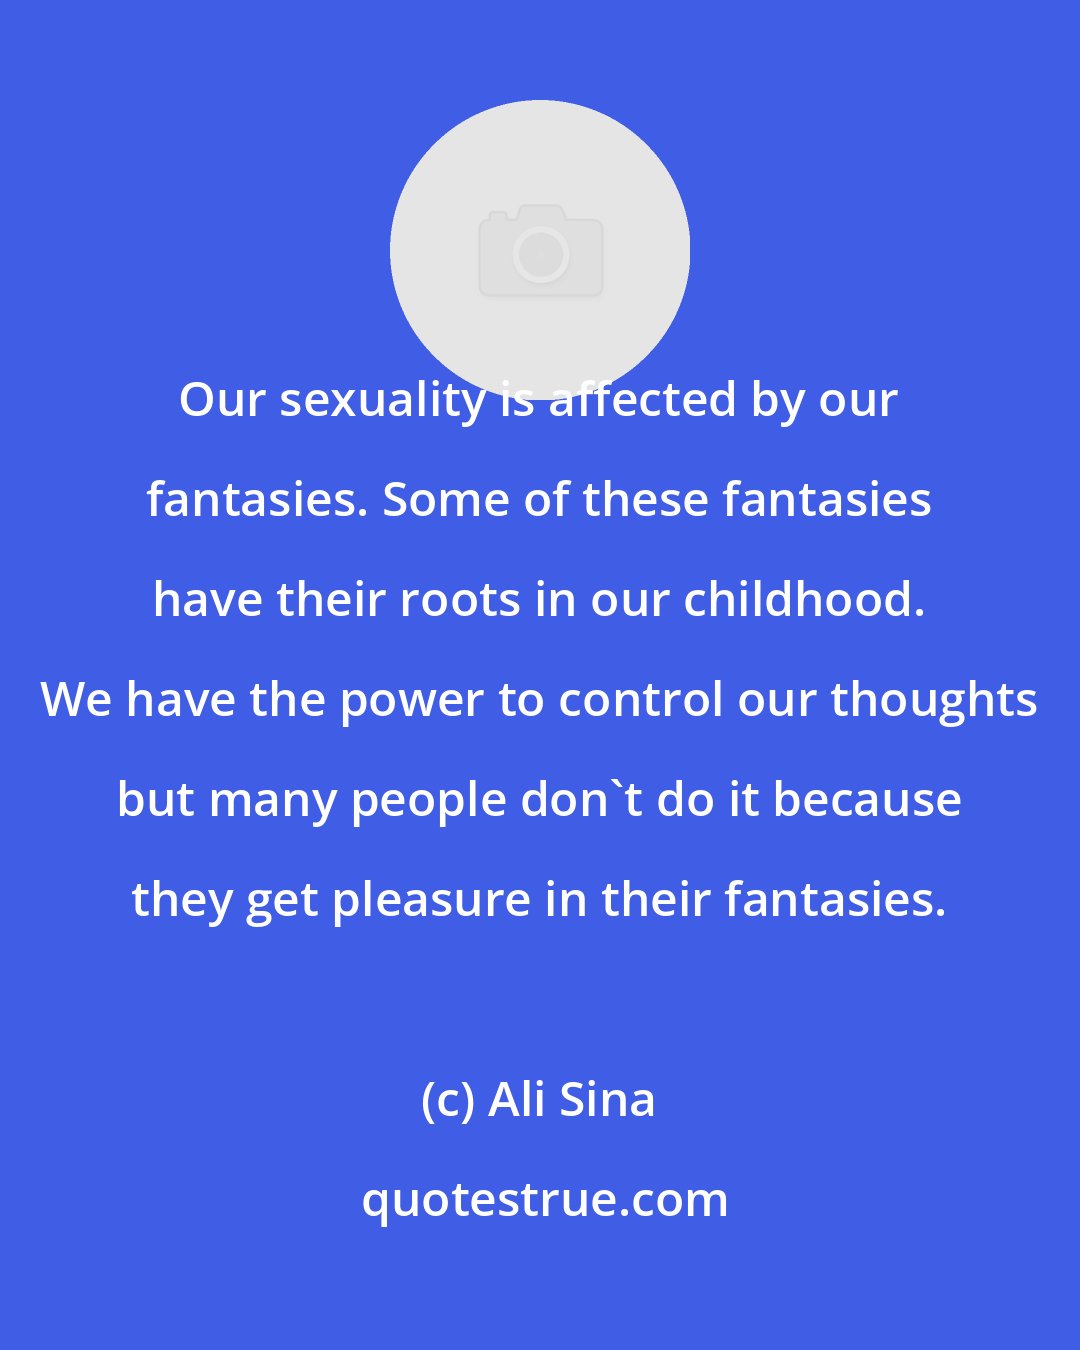 Ali Sina: Our sexuality is affected by our fantasies. Some of these fantasies have their roots in our childhood. We have the power to control our thoughts but many people don't do it because they get pleasure in their fantasies.